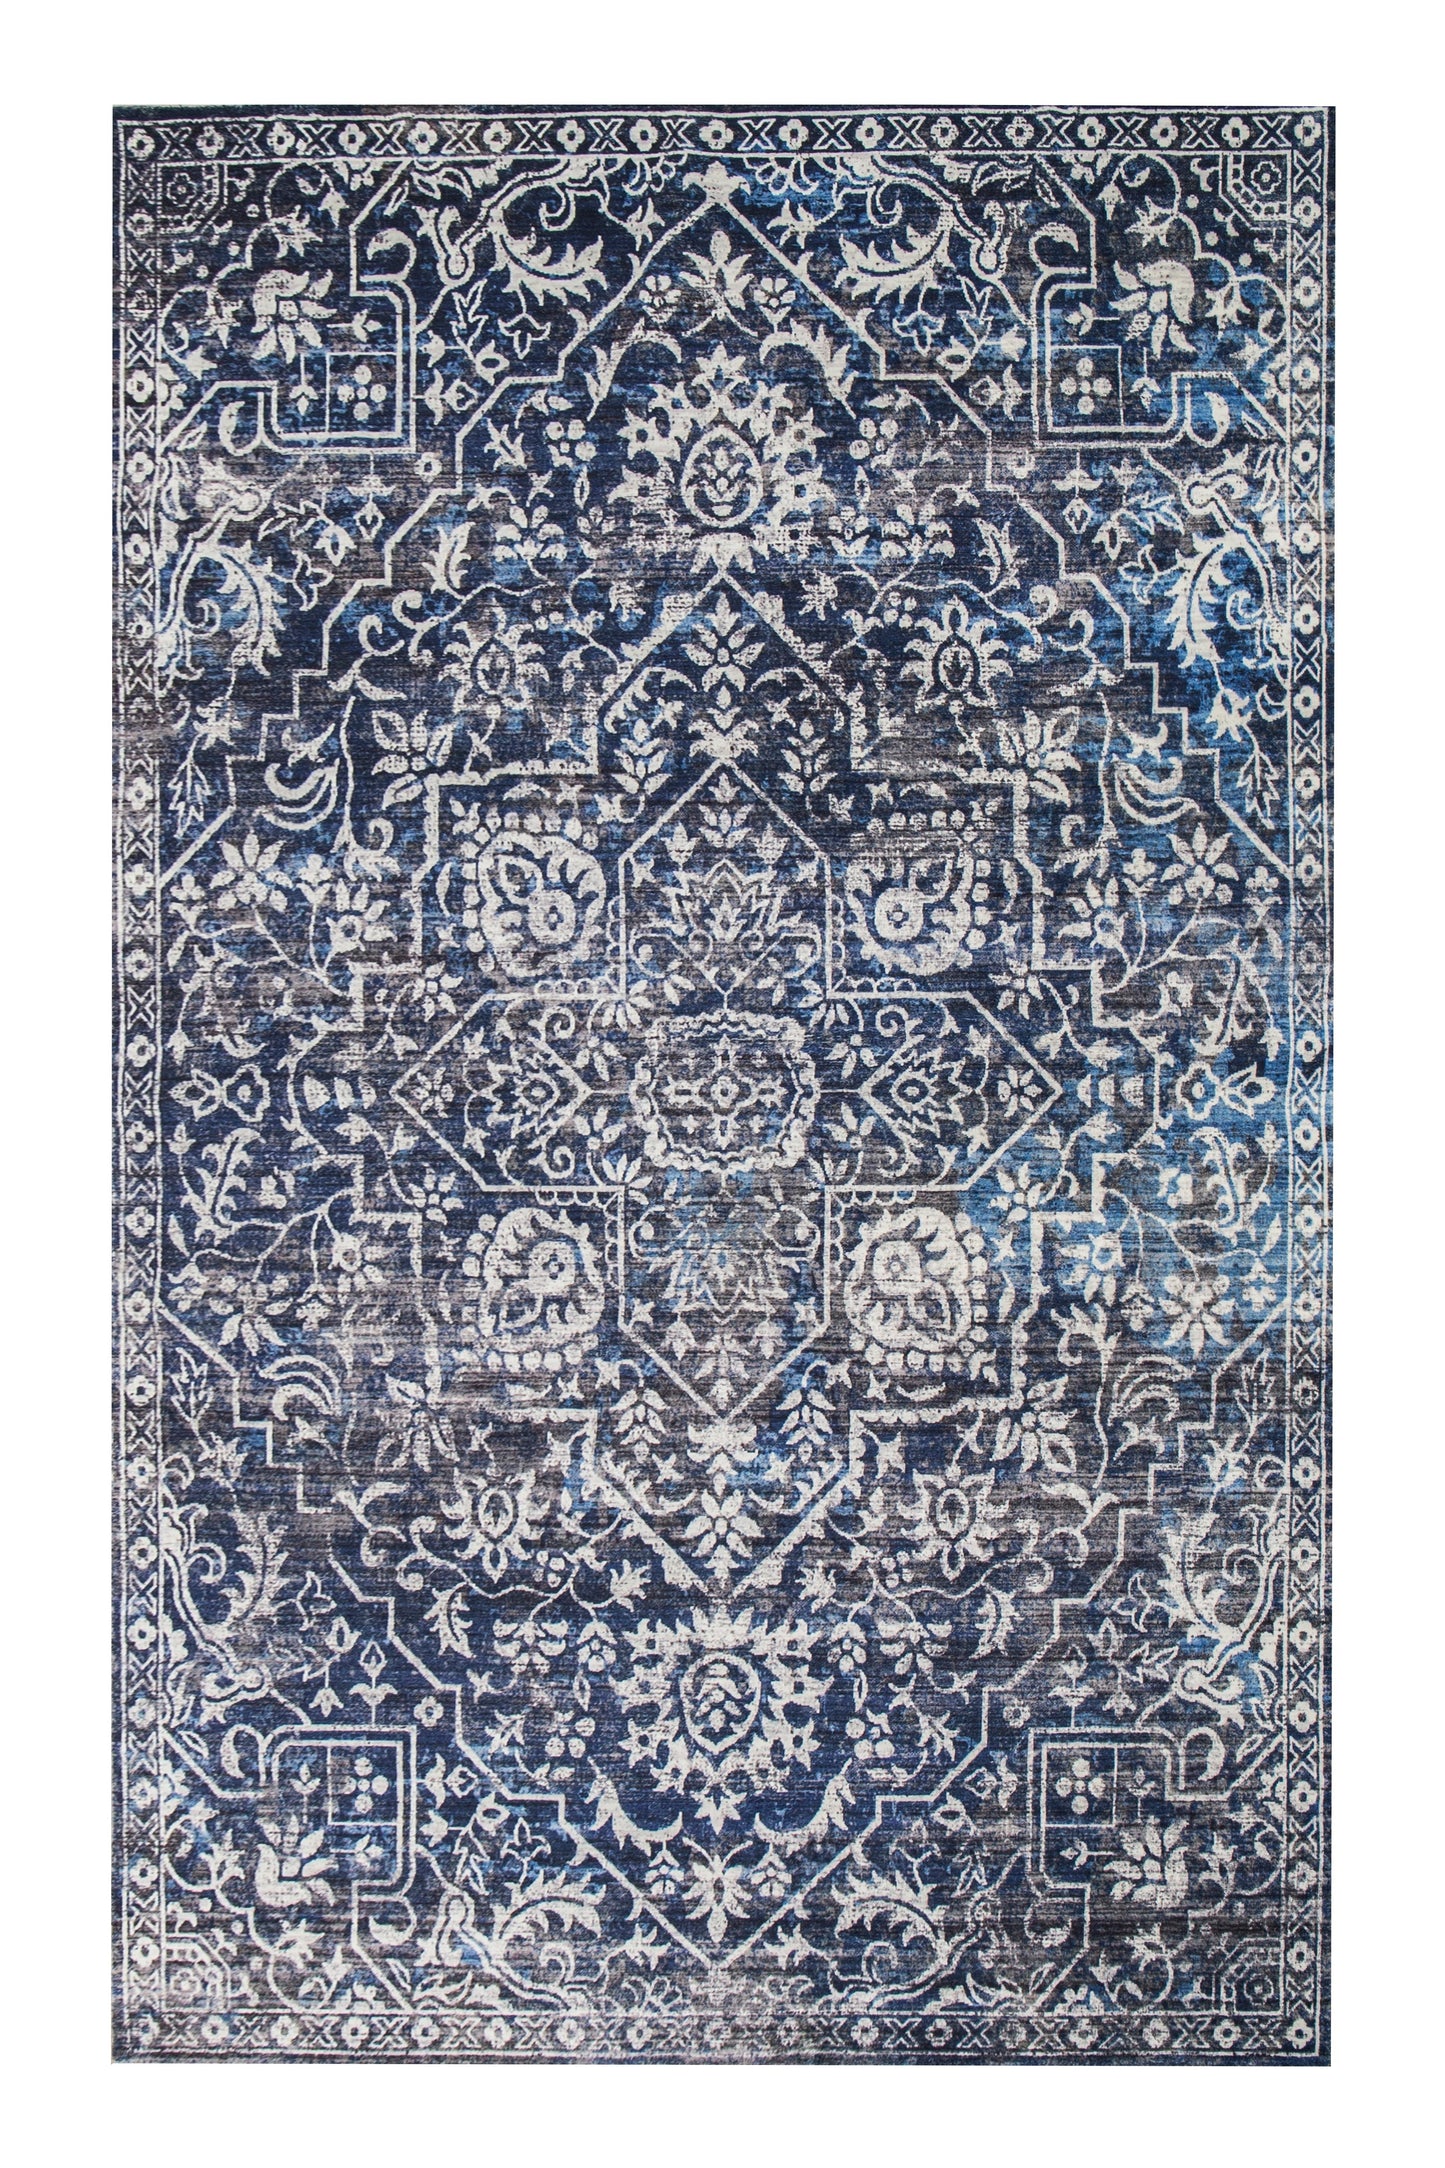 Foldable Anti-Slip Polyester Area Rug | Style #SHAH-28 - Elevate Your Space